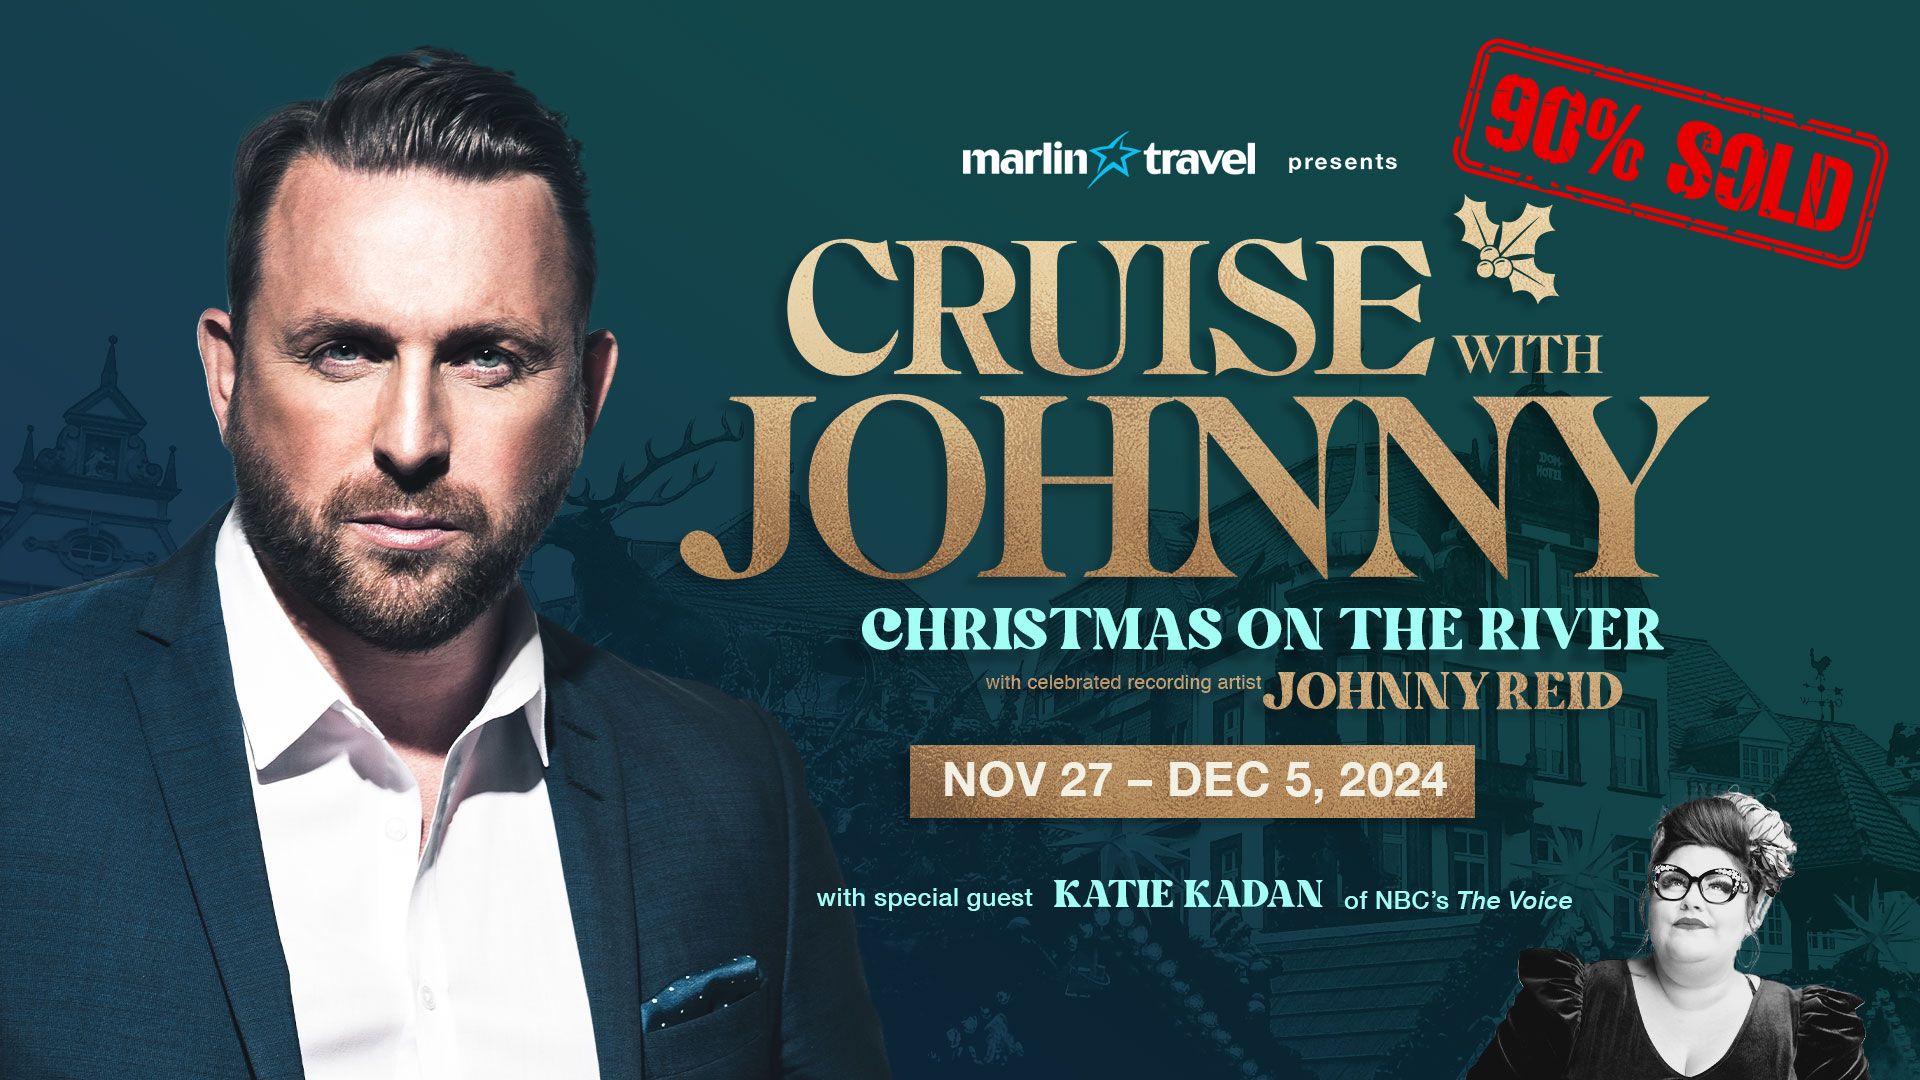 Marlin Travel Presents "Cruise with Johnny" Christmas on the River. With celebrated recording artist Johnny Reid. November 27 to December 5, 2024. With Special Guest Katie Kadan of NBC's The Voice. 50% Sold.